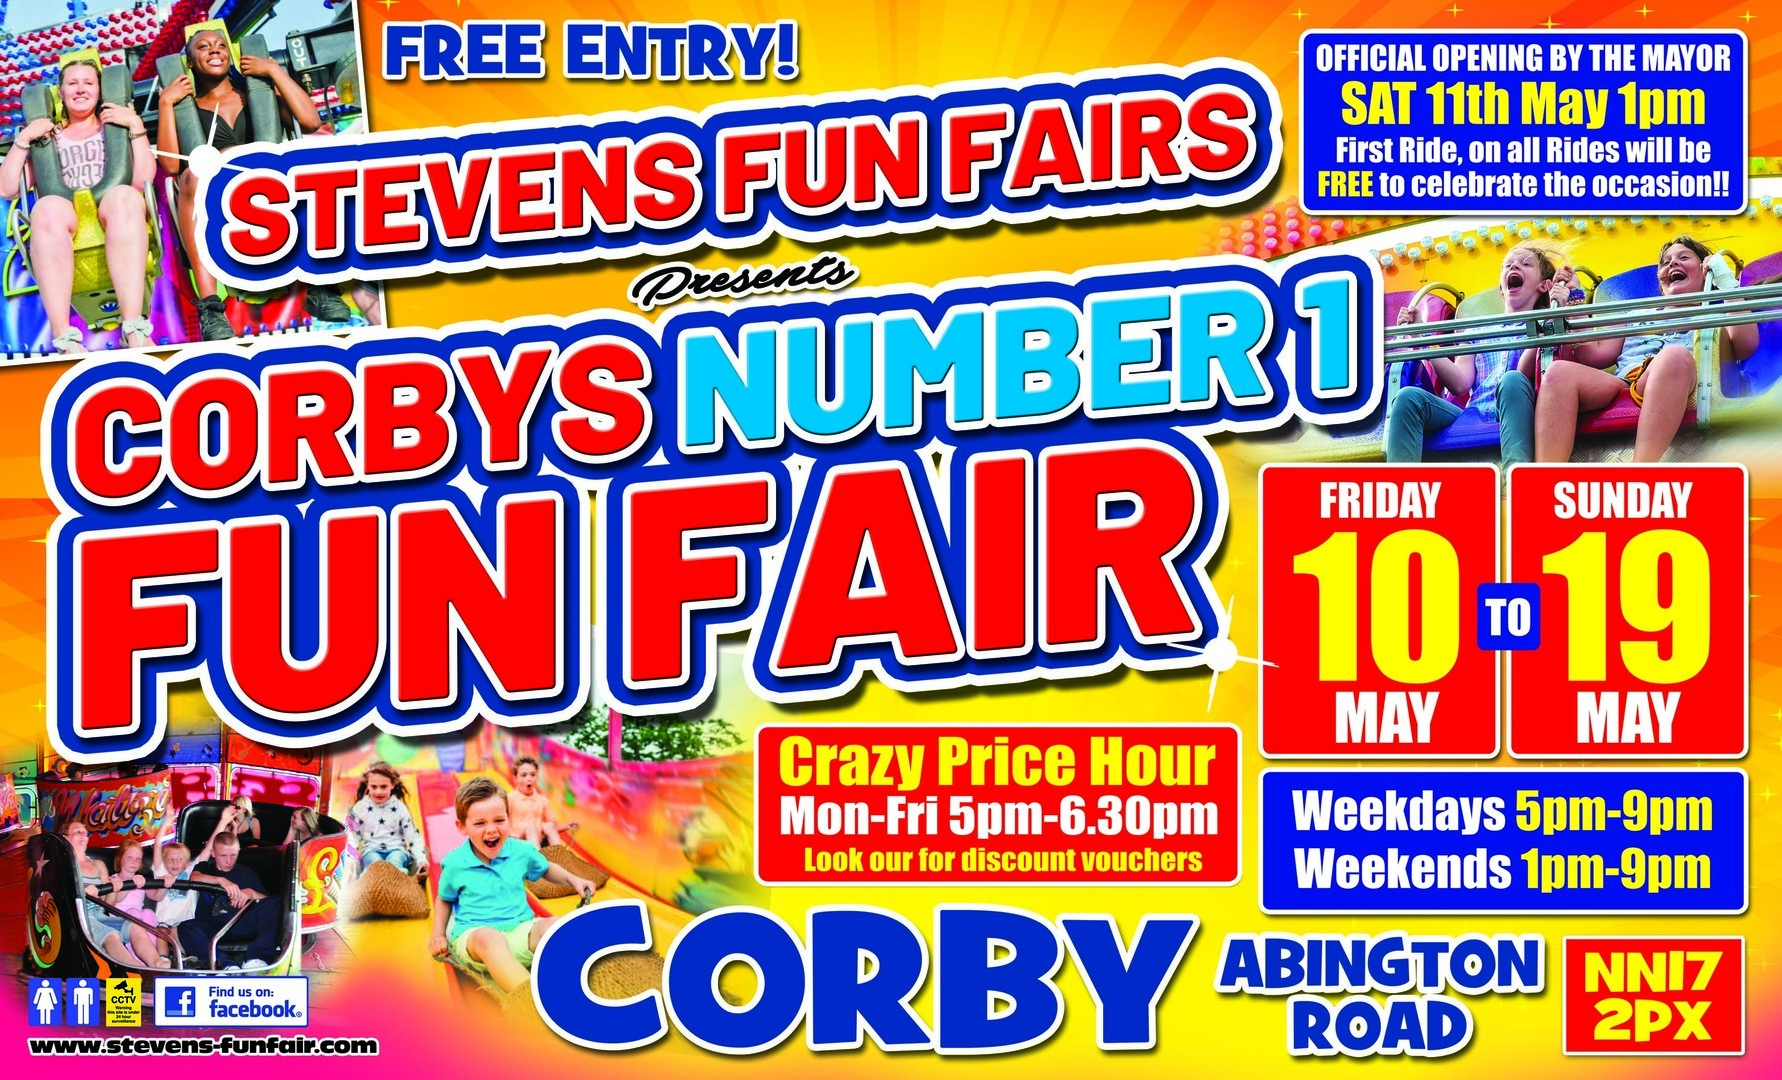 Corby Funfair | May 10th to May 19th | Abington Road NN17 2PX | Corby’s number 1 fair., Corby, England, United Kingdom